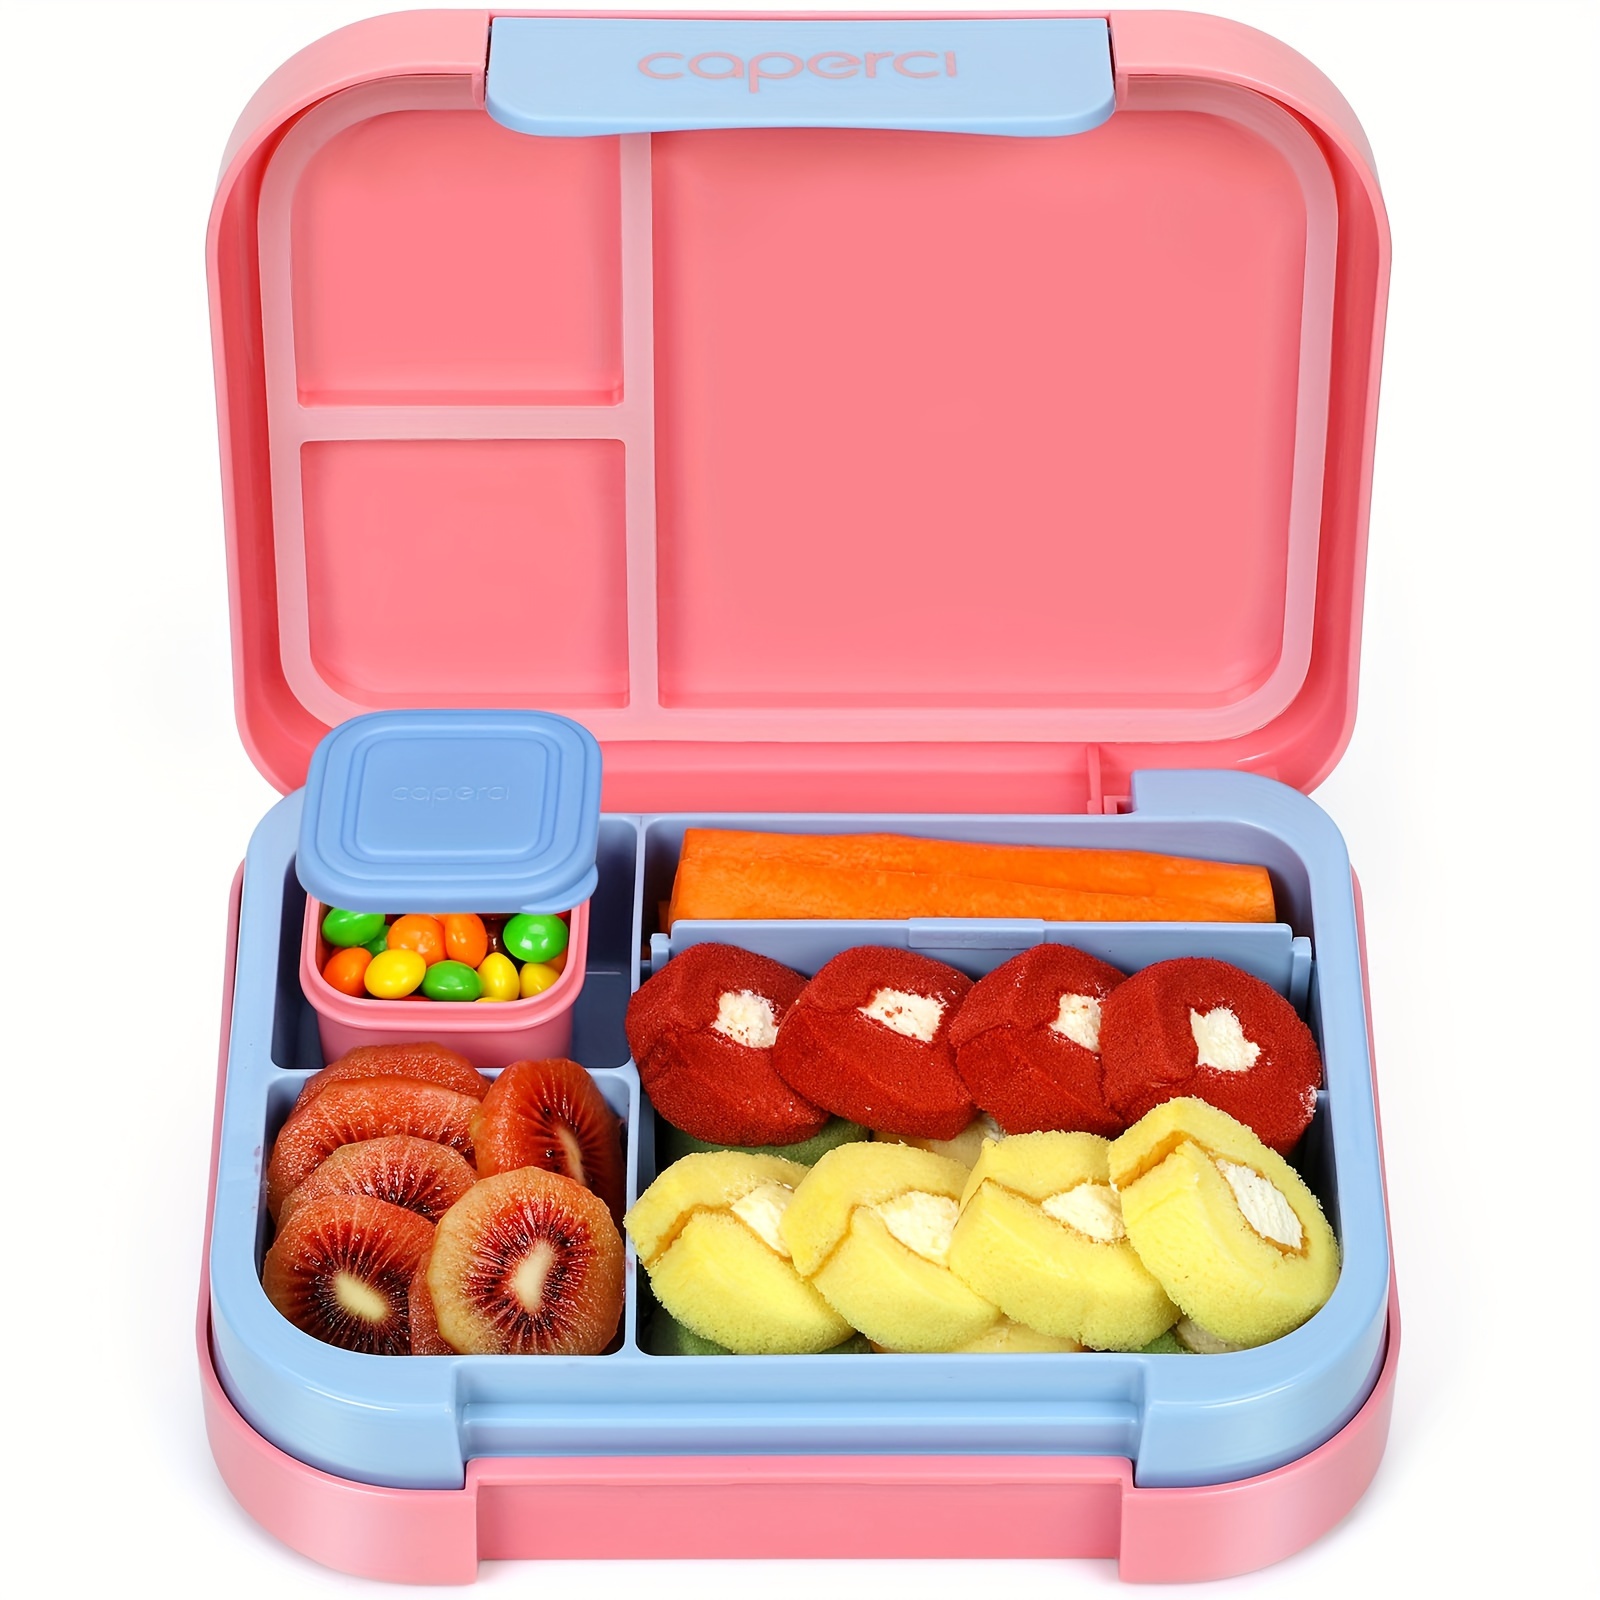 

Caperci Bento Lunch Box - Leak-proof 44oz Lunch Containers With 3 Or 4 Compartments & Dip Container, Dishwasher/microwave Safe, Bpa-free